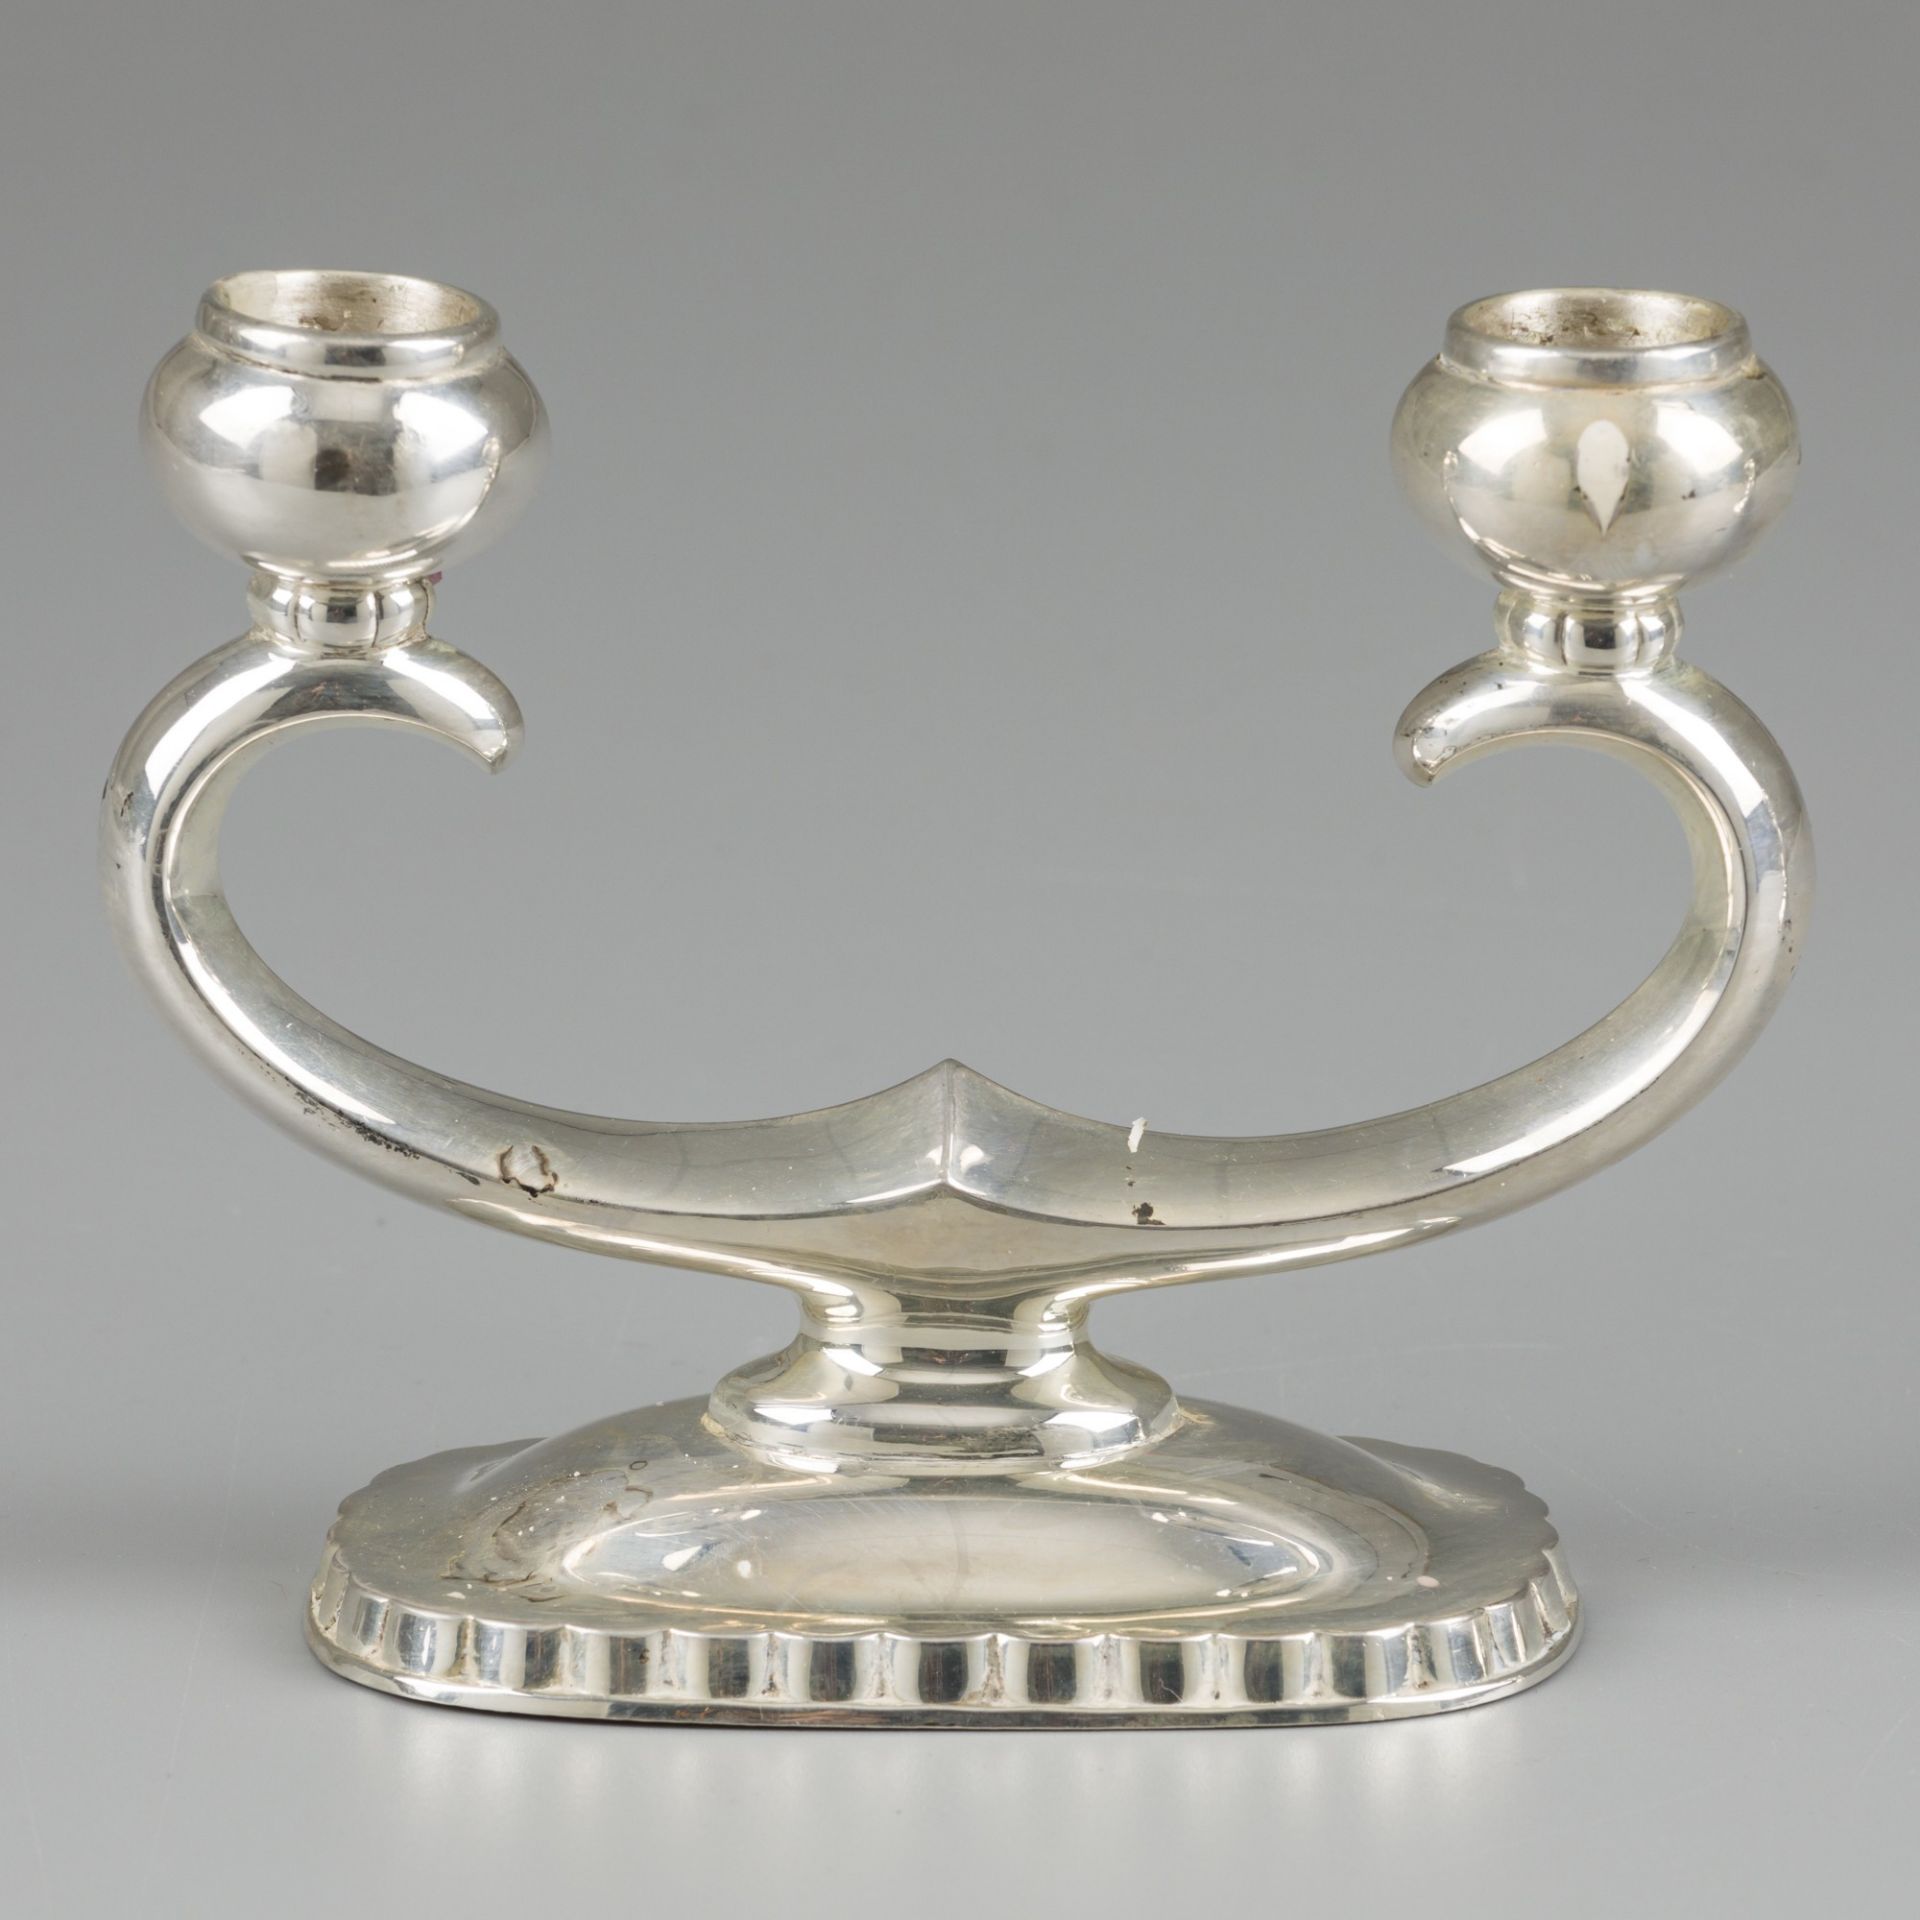 2-piece set of candlesticks silver. - Image 2 of 5